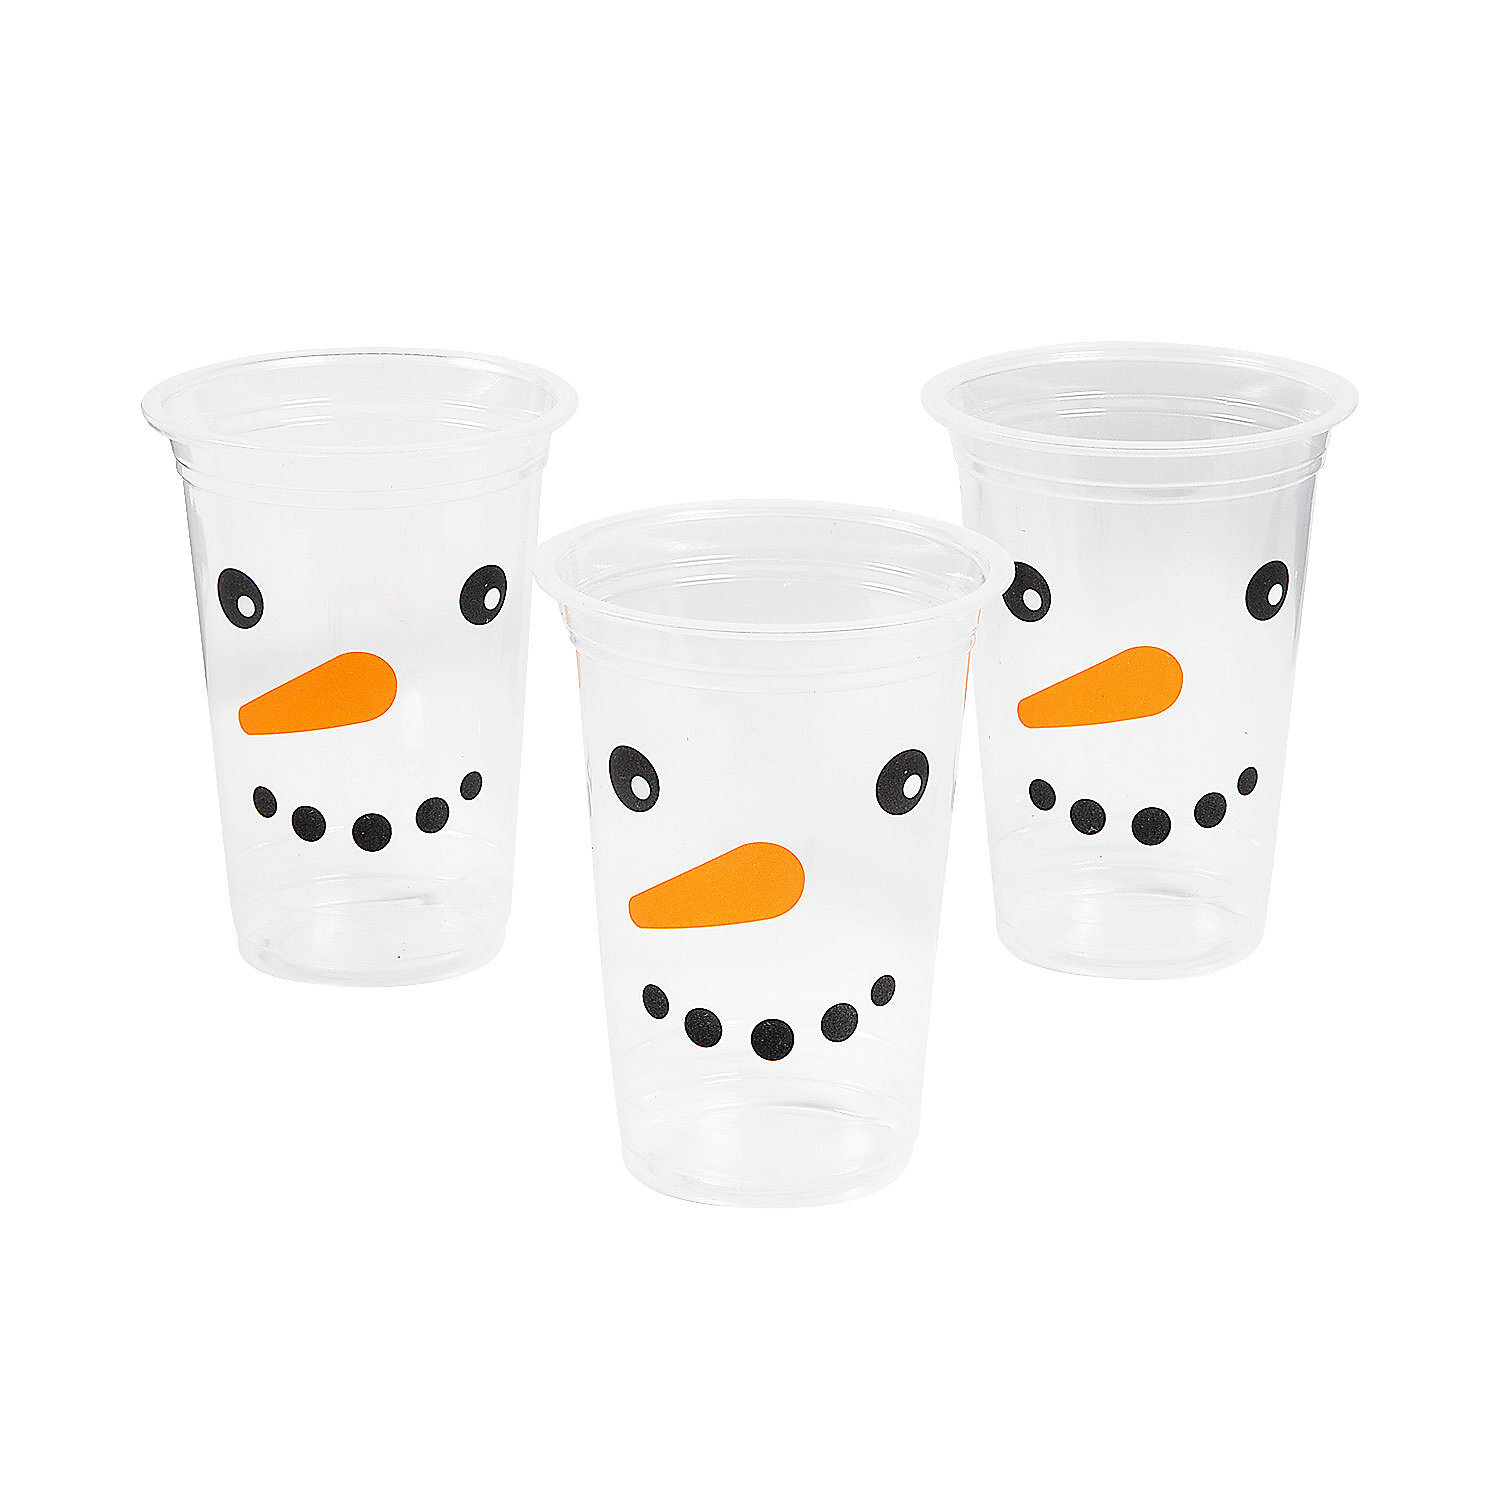 Oriental Trading Company Disposable Plastic Christmas Cups for 50